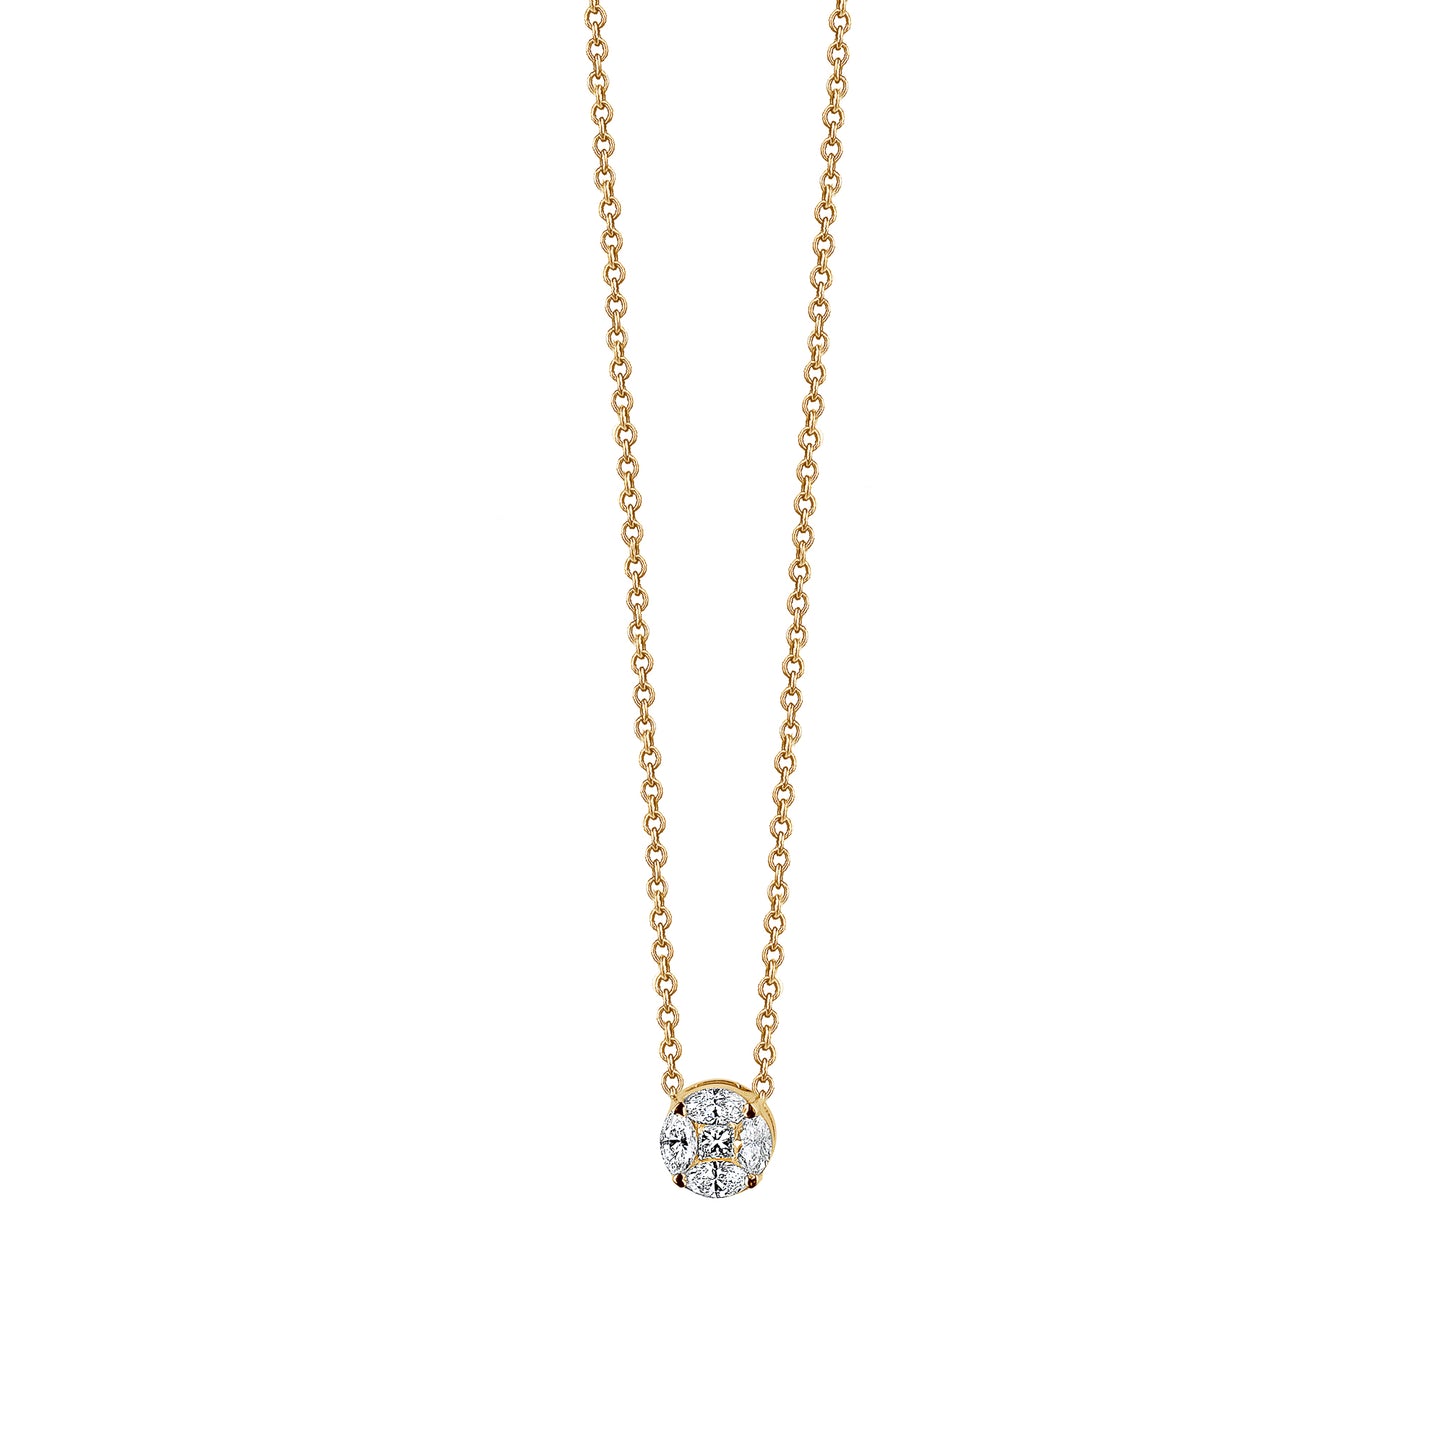 Round Cluster Diamond Pendant on Chain Necklace